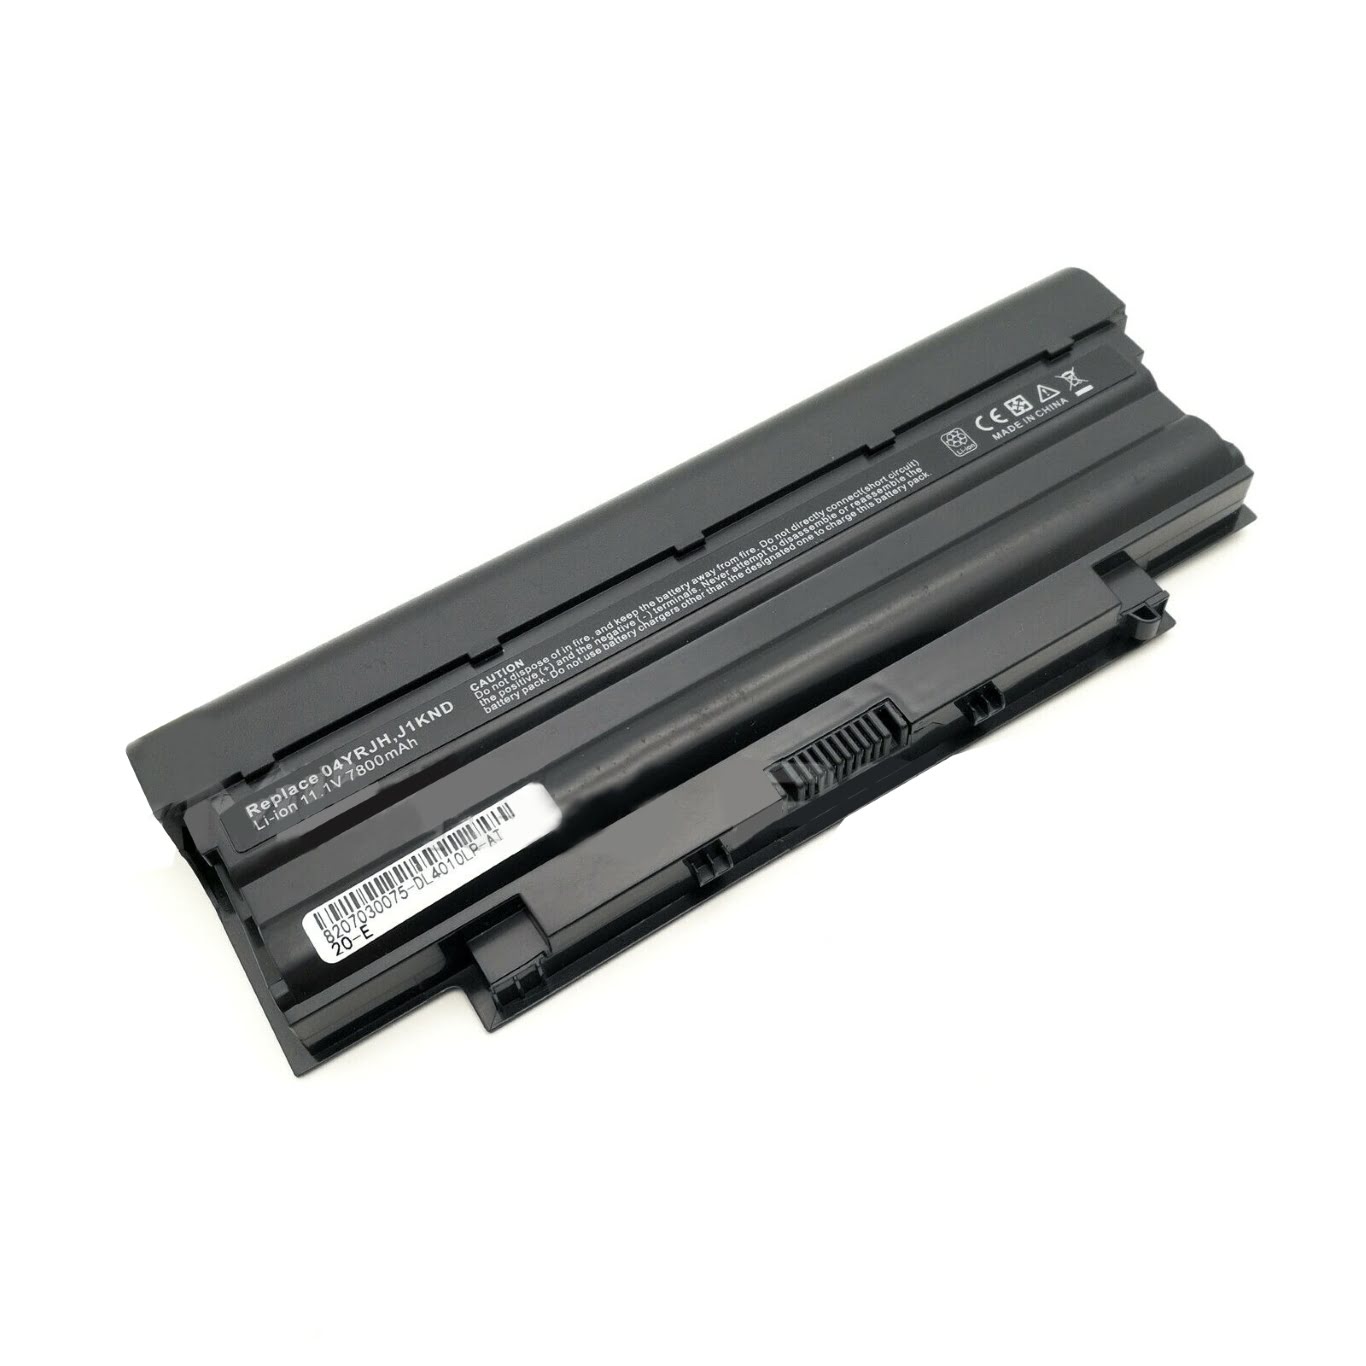 0383CW, 04T7JN replacement Laptop Battery for Dell Inspiron 13R, Inspiron 13R (3010-D330), 9 cells, 11.1V, 6600mAh